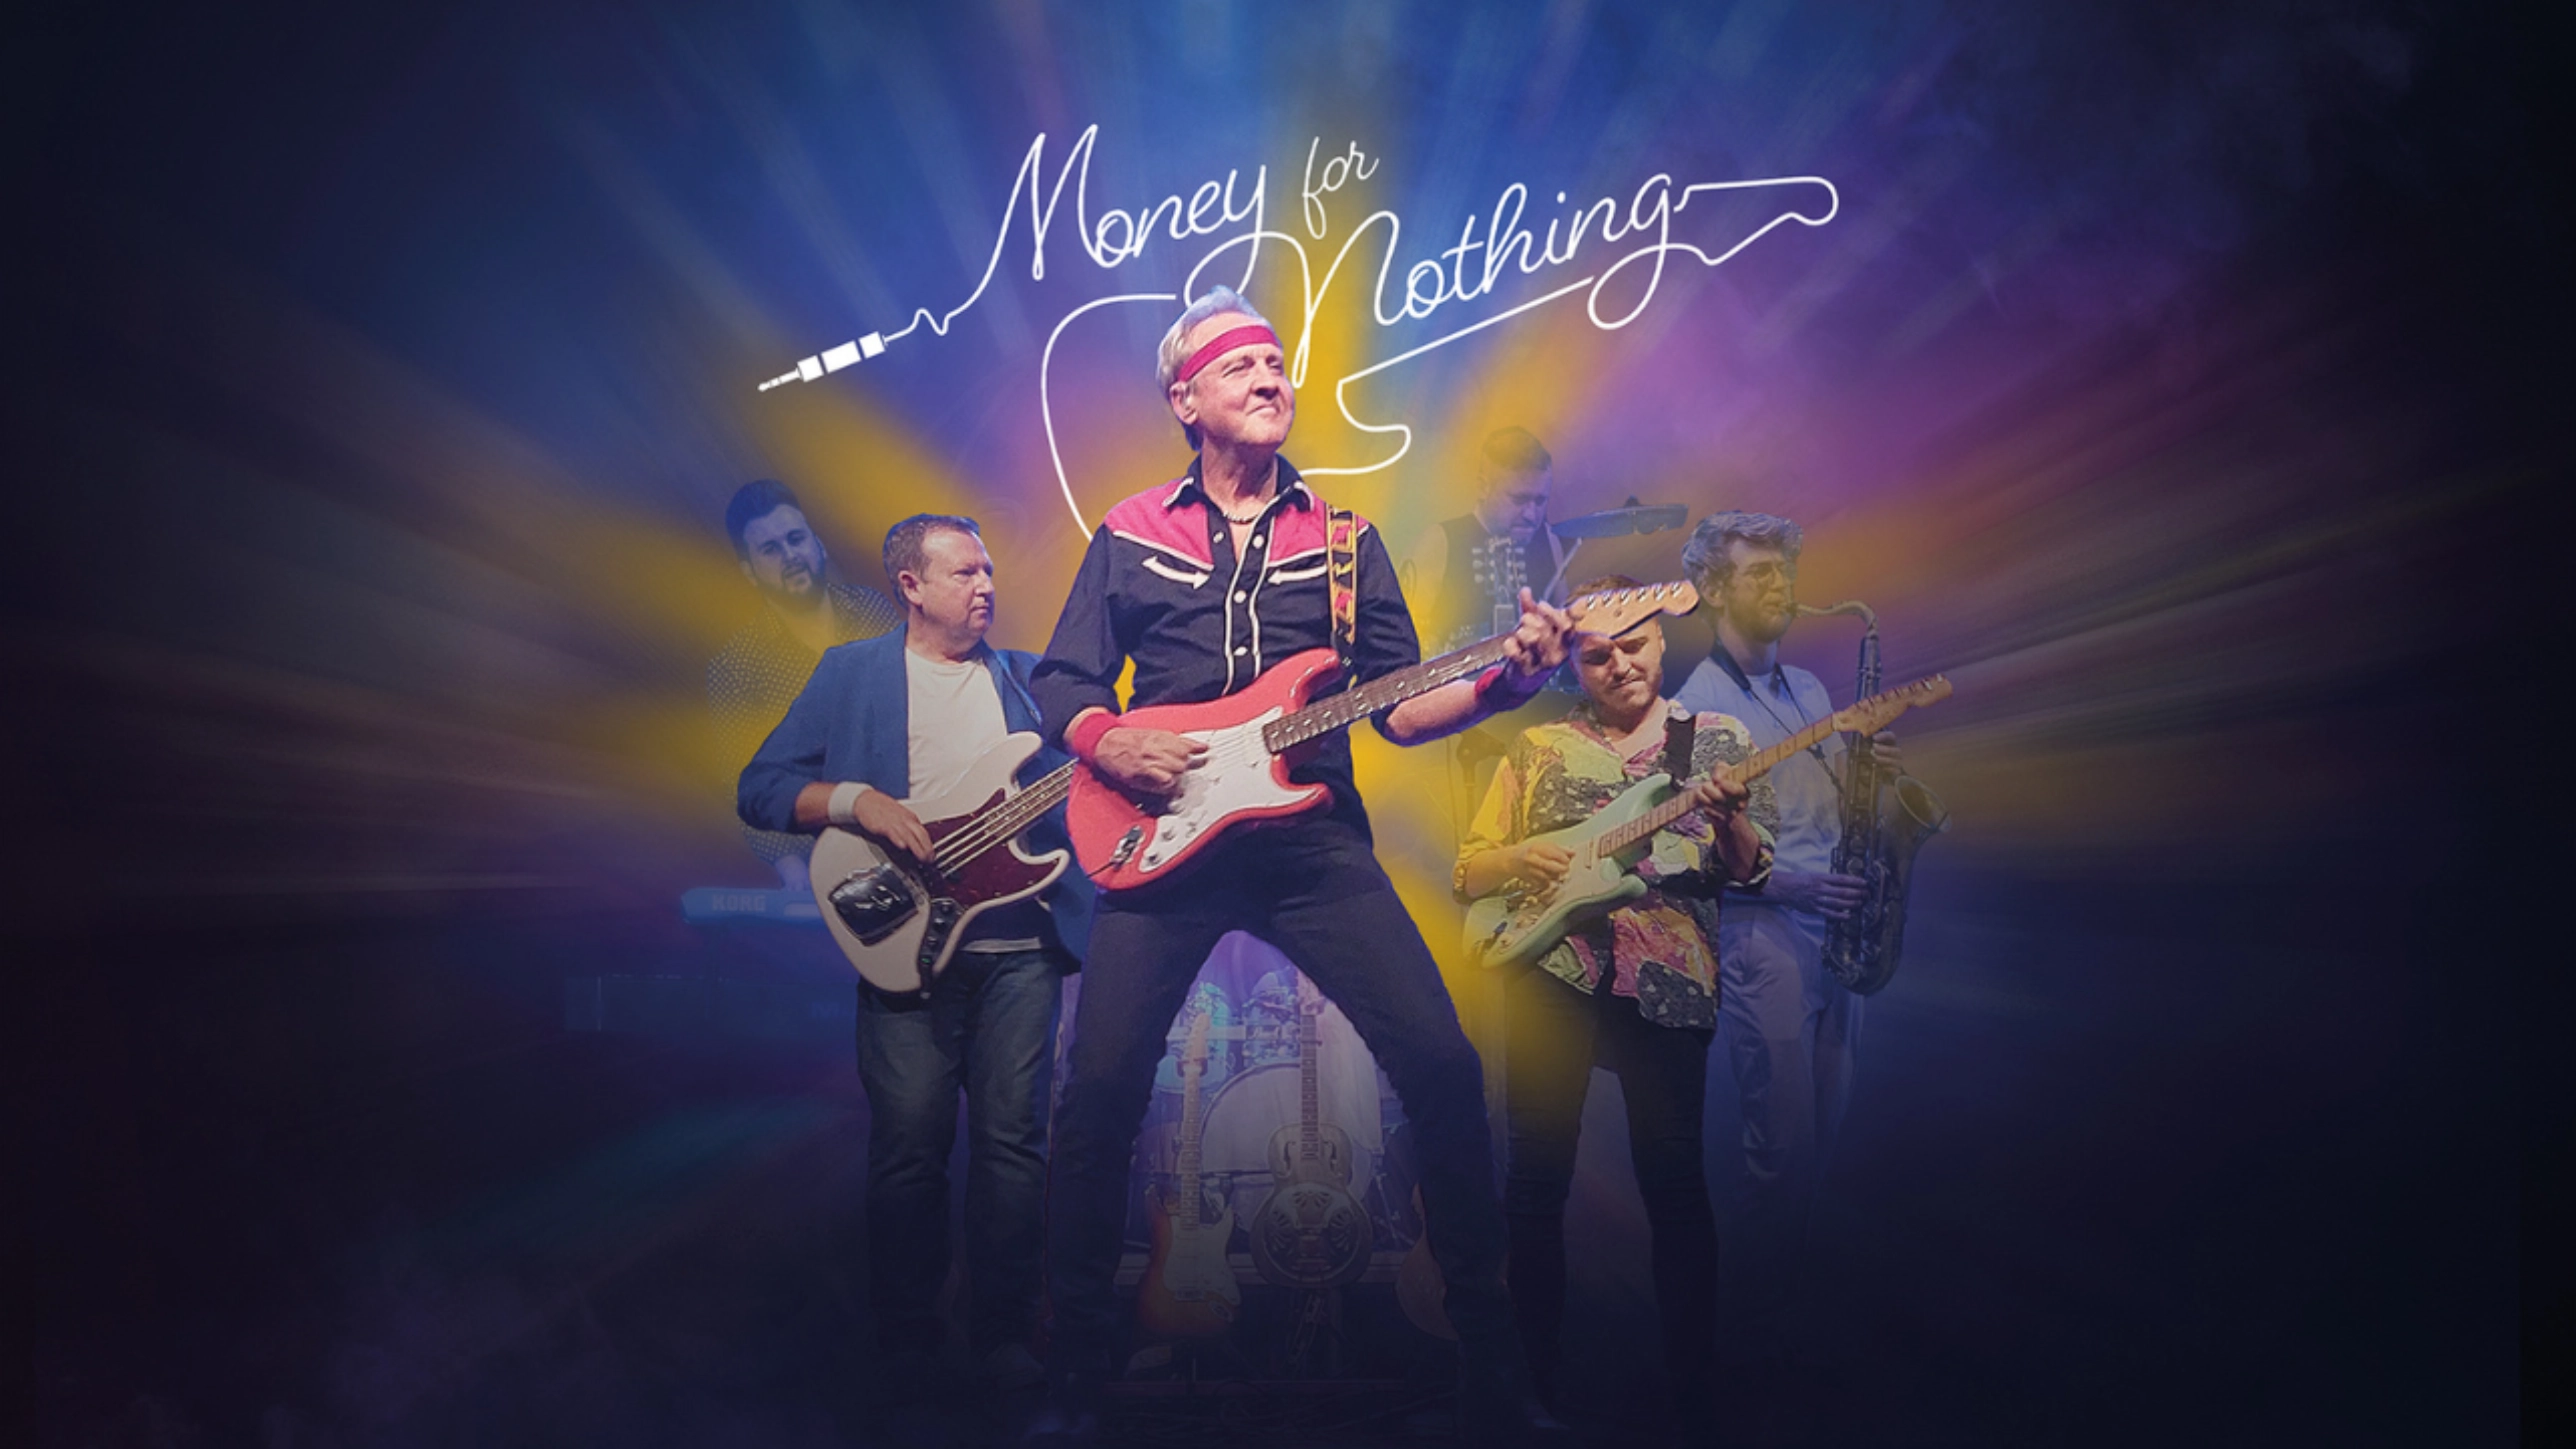 Money for Nothing - Dire Straits Tribute